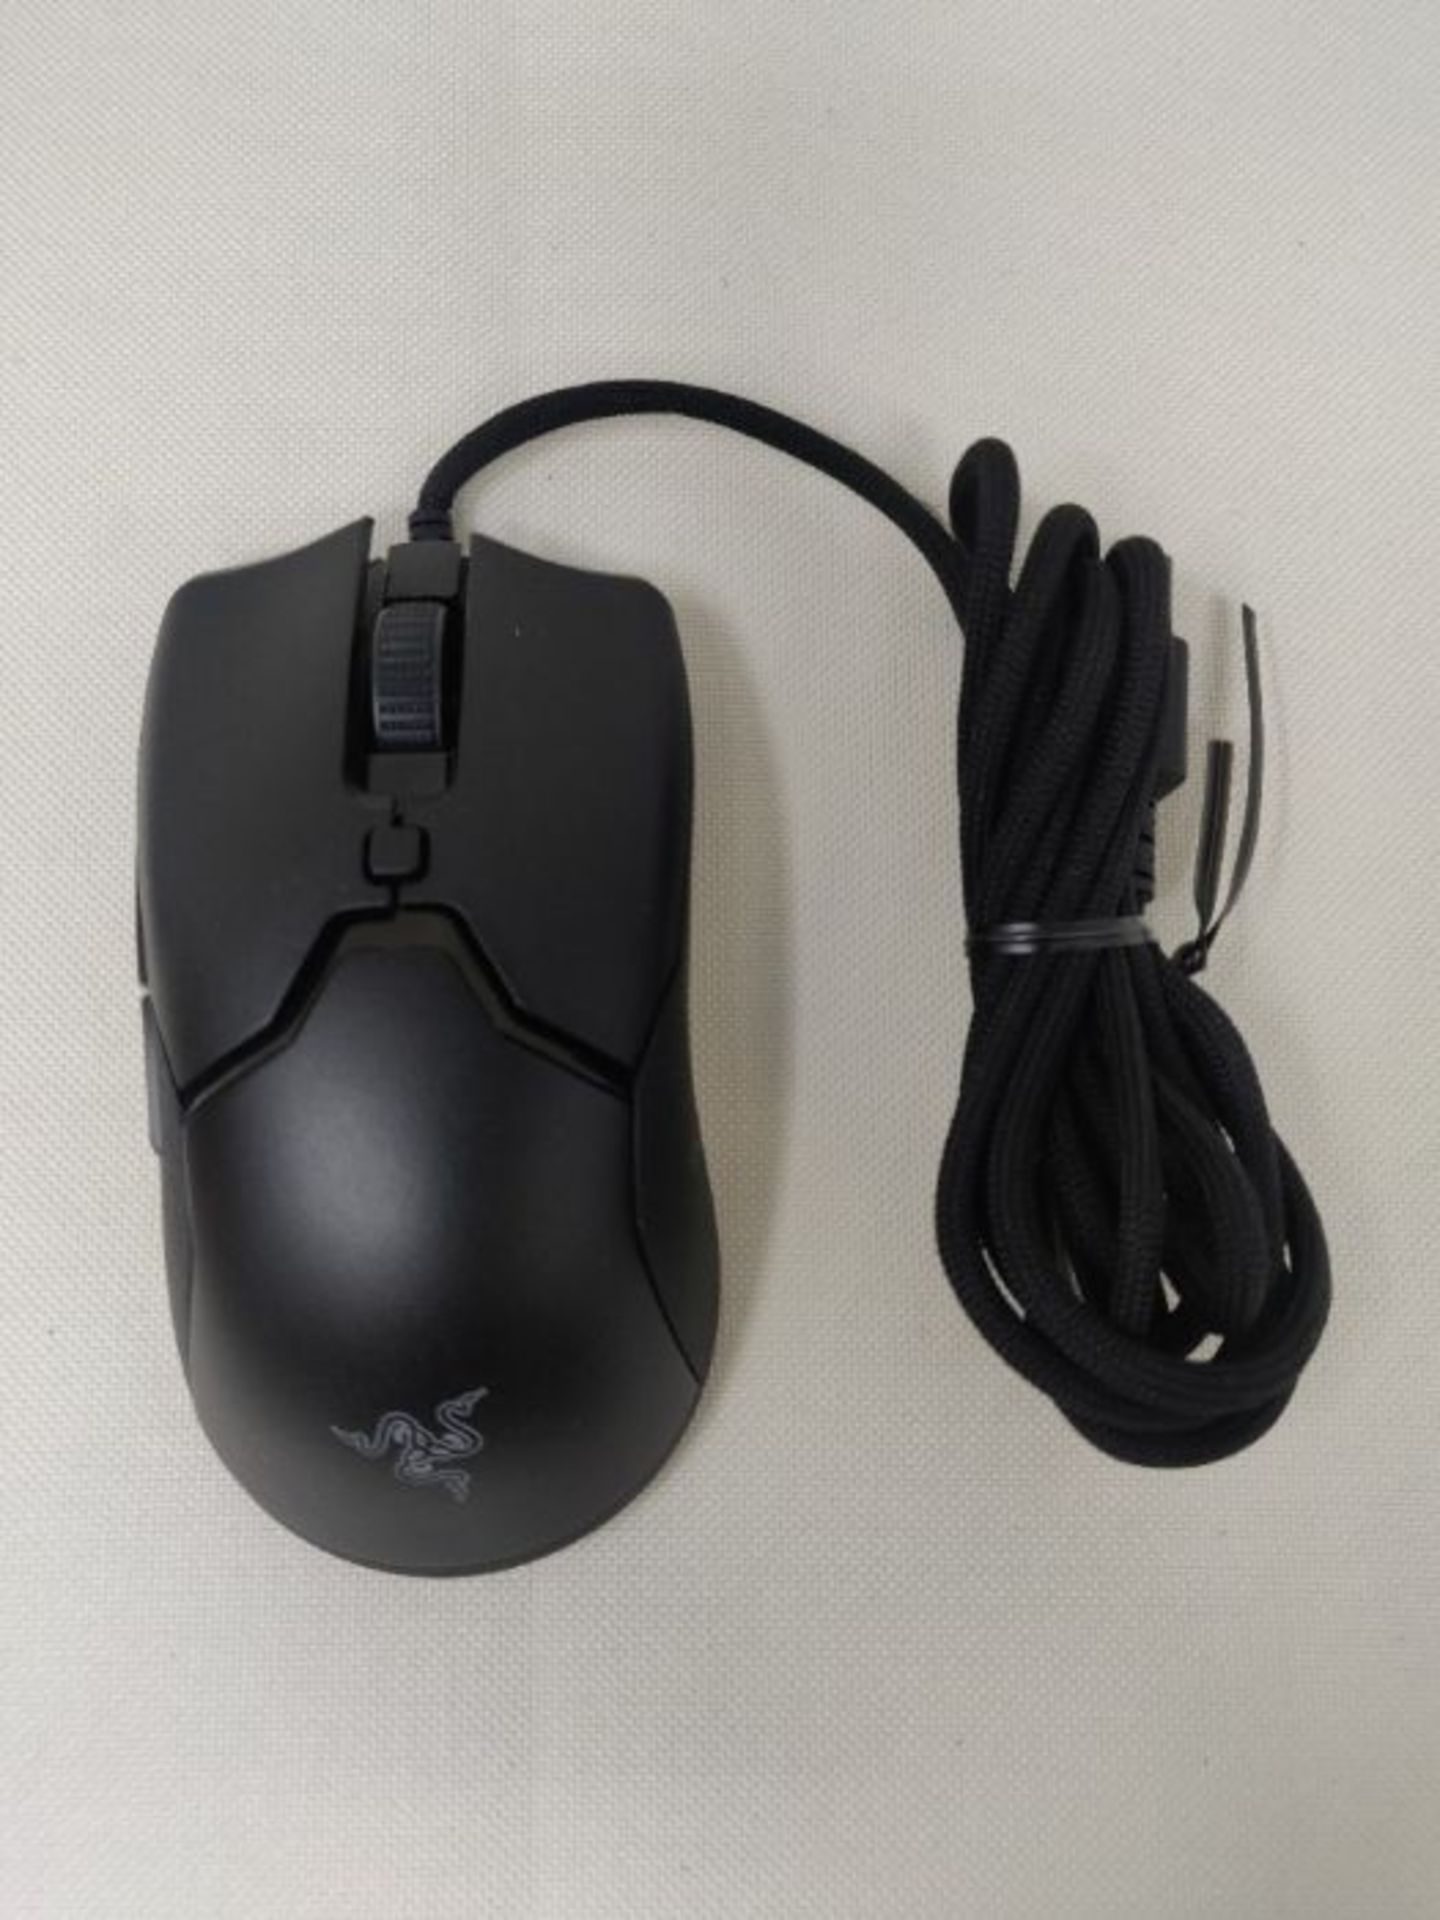 Razer Viper Mini - Wired Gaming Mouse weighing only 61g for PC / Mac (Ultralight, Ambi - Image 3 of 3